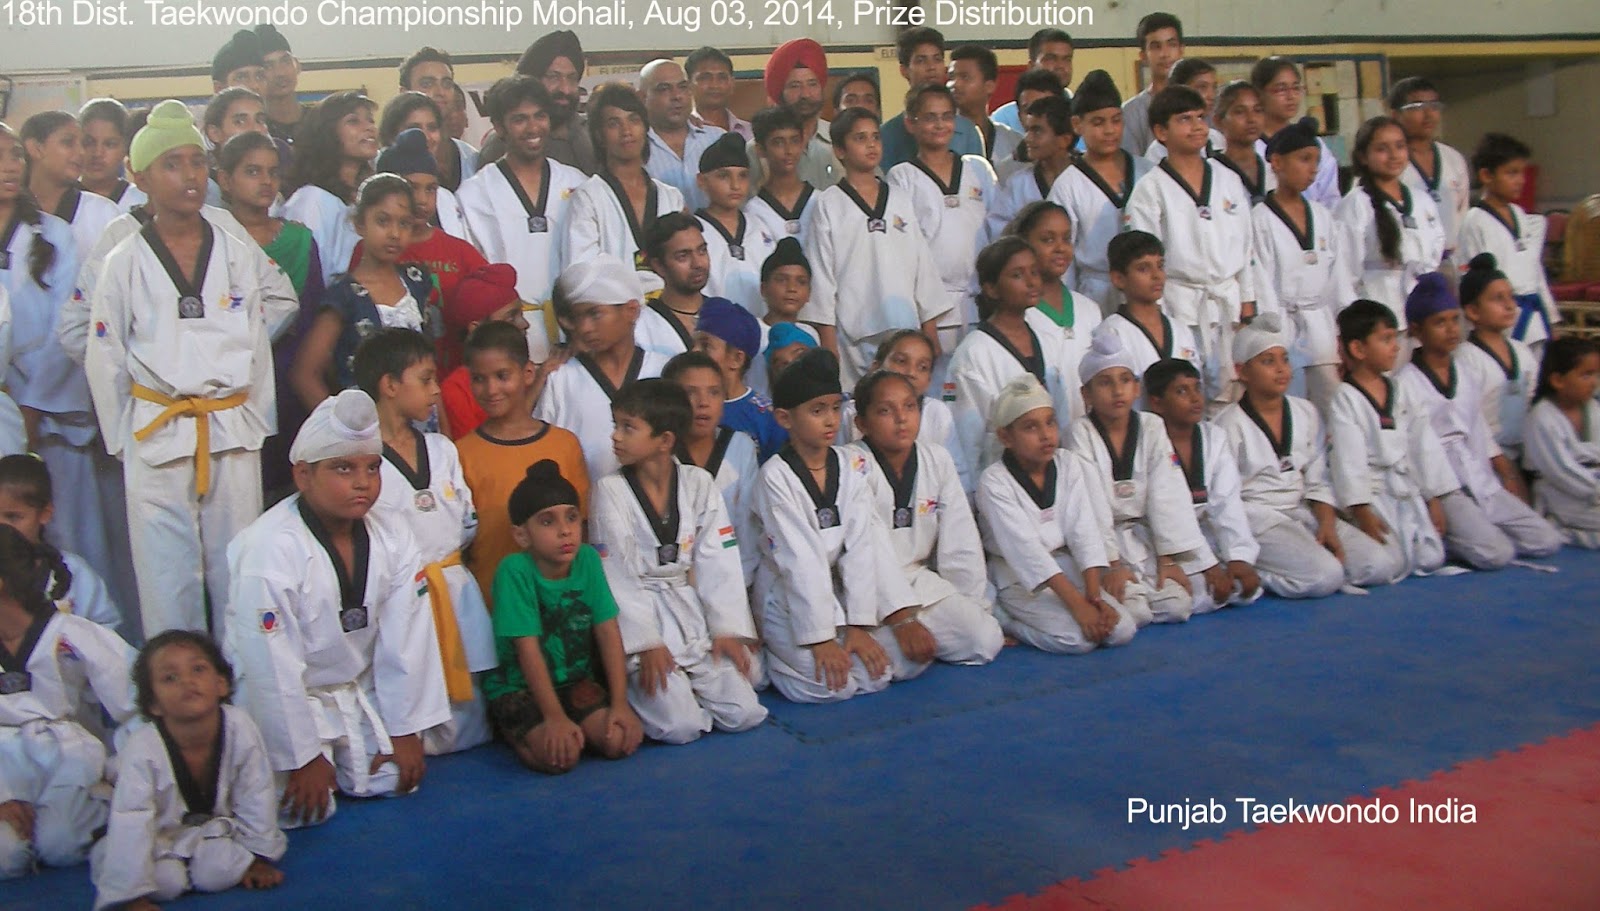 Winner players in a Group Photo after Prize Distribution at 18th District Taekwondo Championship, Mohali near Chandigarh, Punjab, with the Chief Guest, other Guest of Honour personalities & Master Satpal Singh Rehal